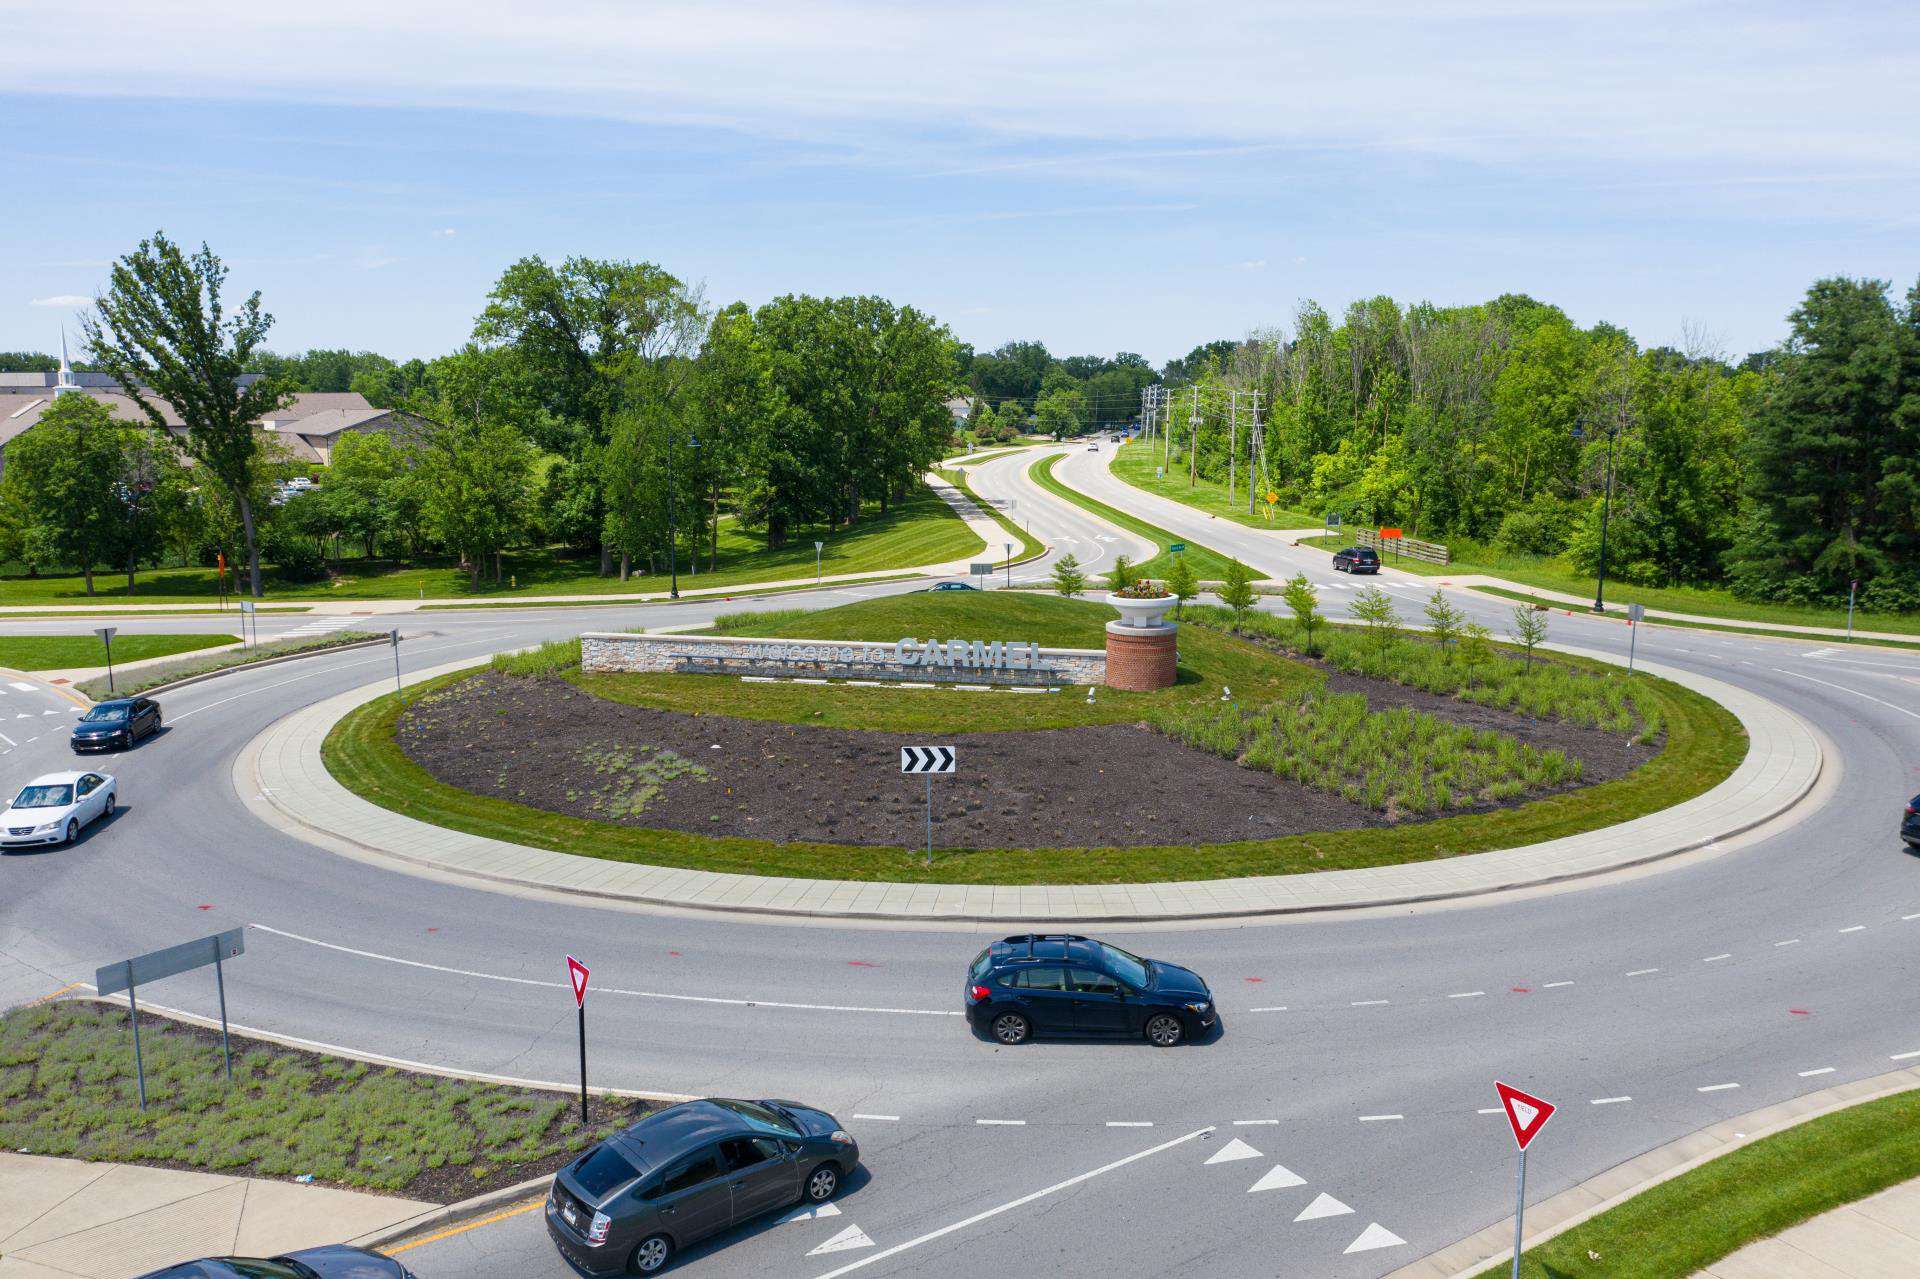 image for TIL Carmel, a city in Indiana, has the highest number of traffic roundabouts in the US. Since late 1990s the city has built 125 roundabouts.